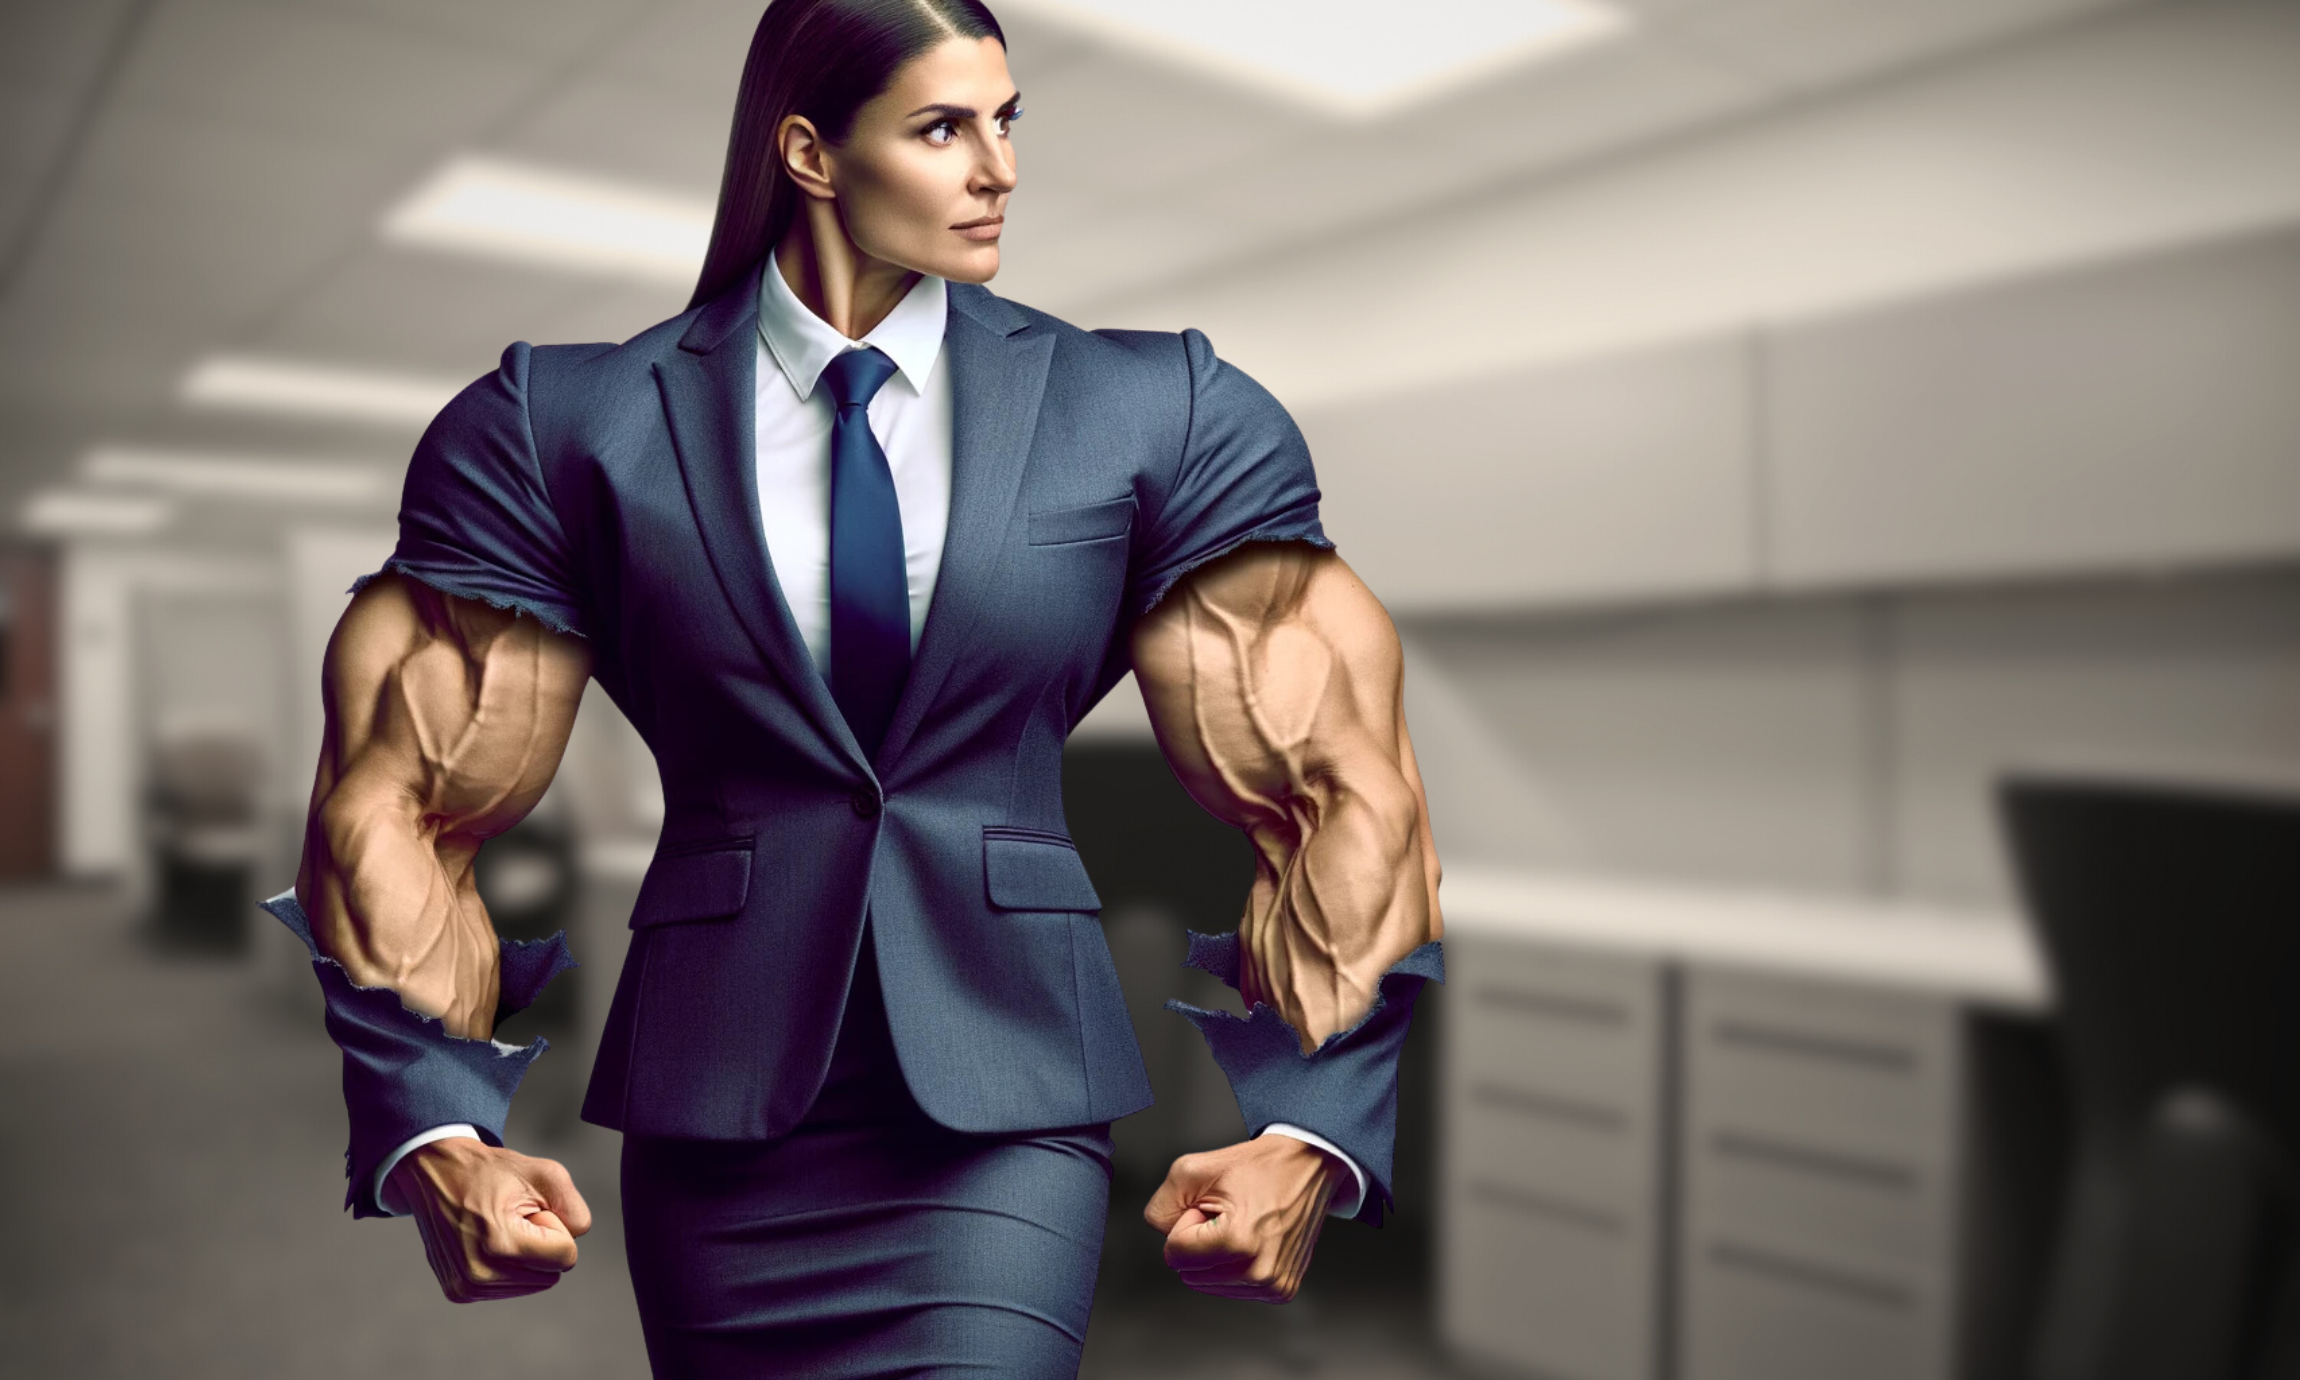 The Workplace Warrior: How to Stay Active at Work